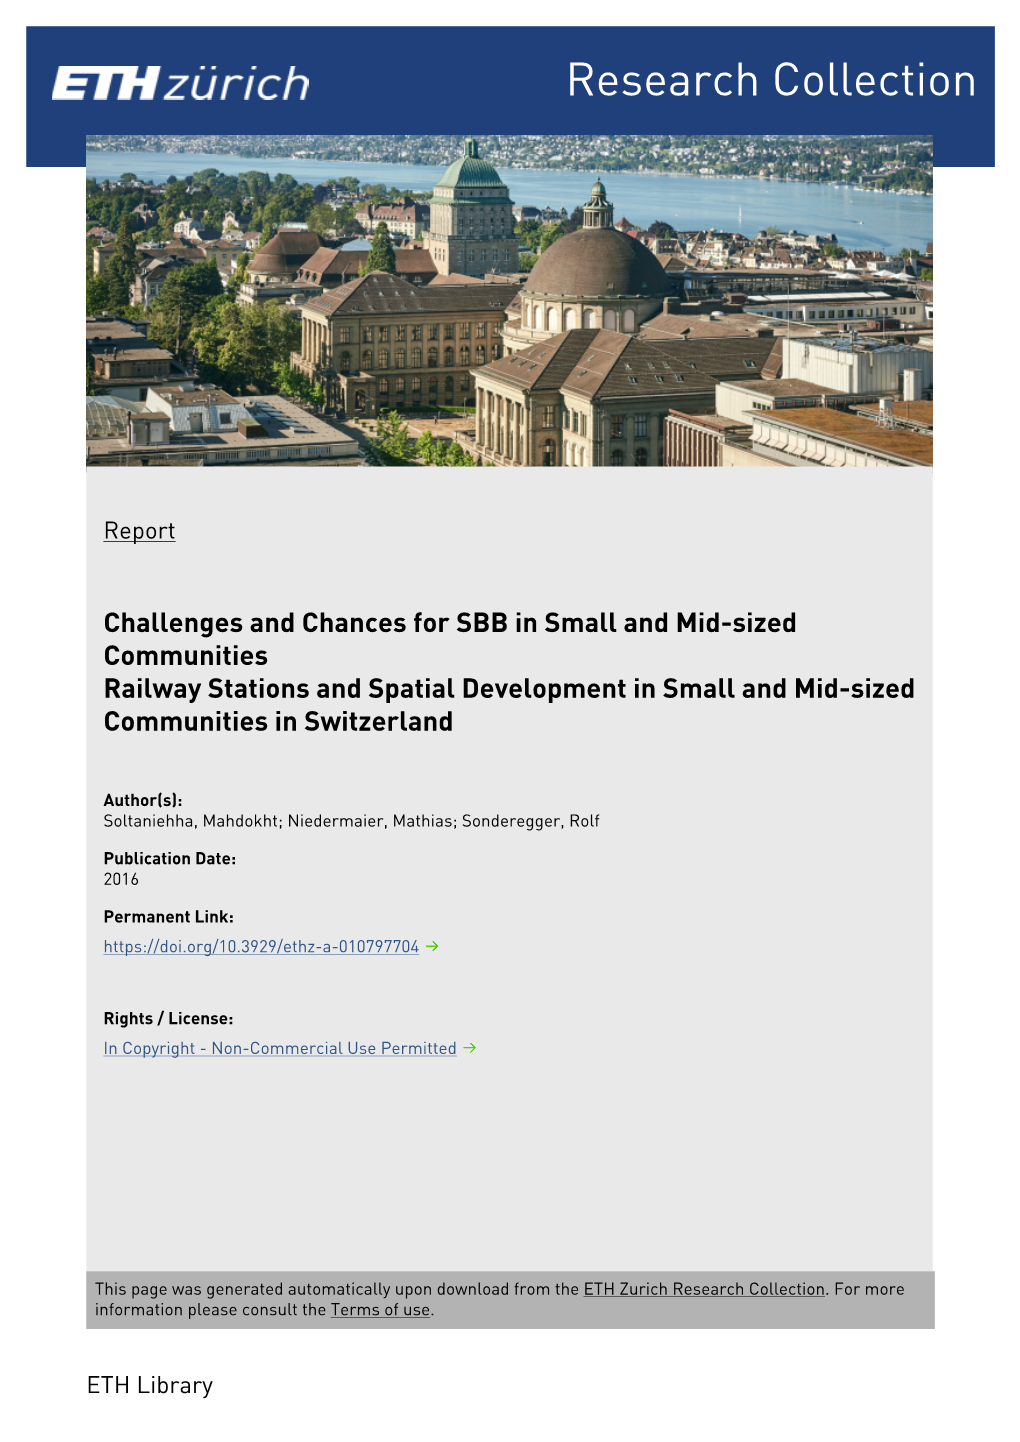 Challenges and Chances for SBB in Small and Mid-Sized Communities Railway Stations and Spatial Development in Small and Mid-Sized Communities in Switzerland